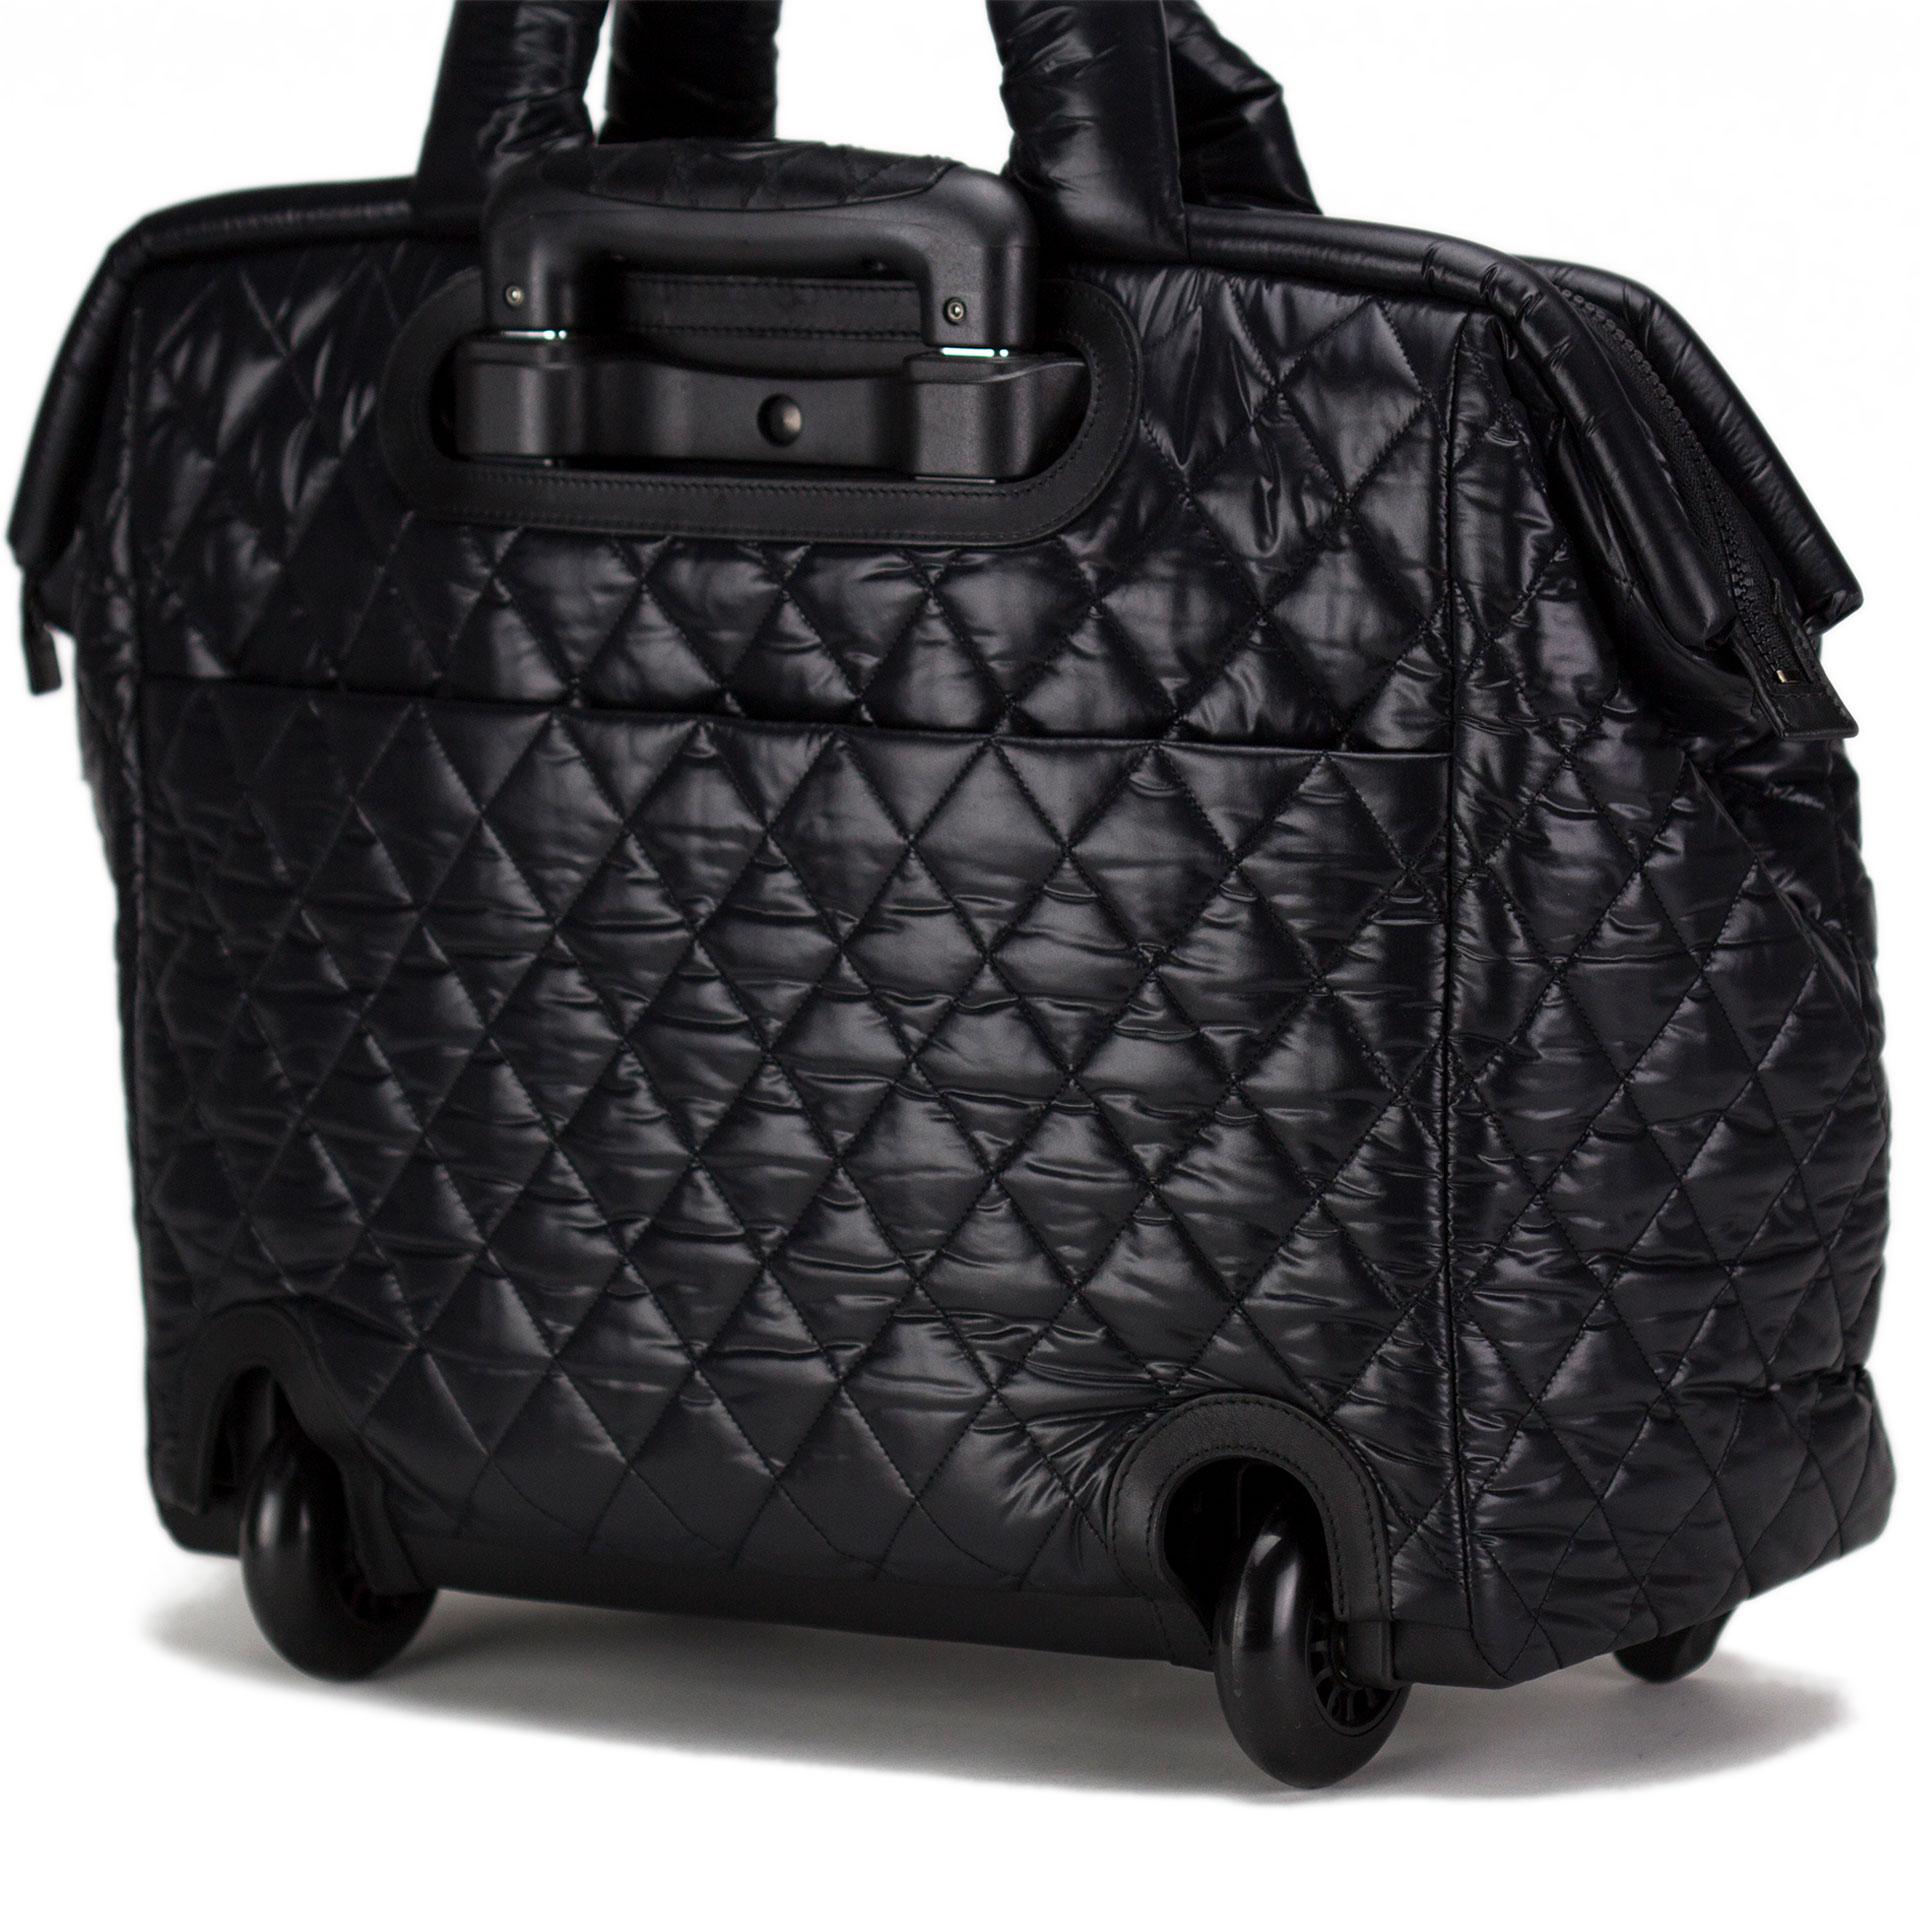 Chanel 2012 Coco Cocoon Quilted Case Carry On Trolley Travel Black Luggage Bag 1